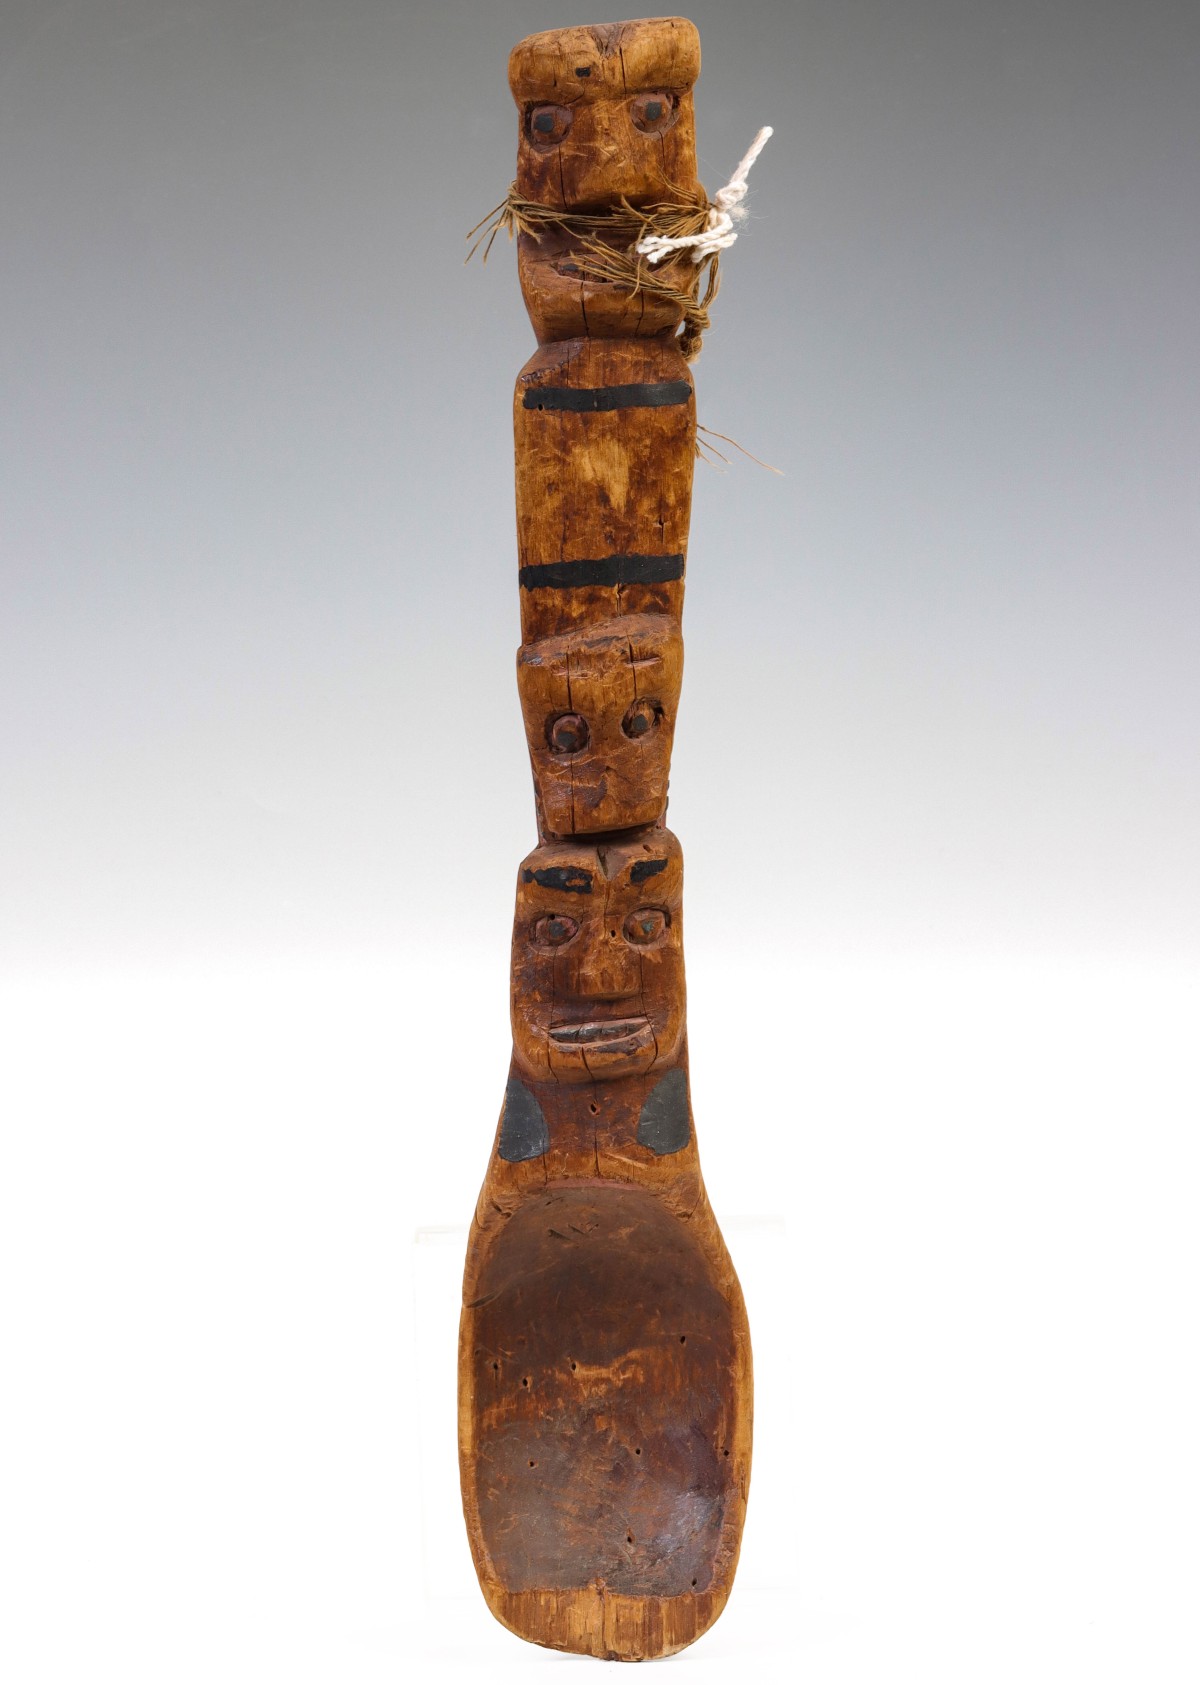 A CARVED SPOON OF UNKNOWN ORIGIN WITH TOTEMIC FIGURES